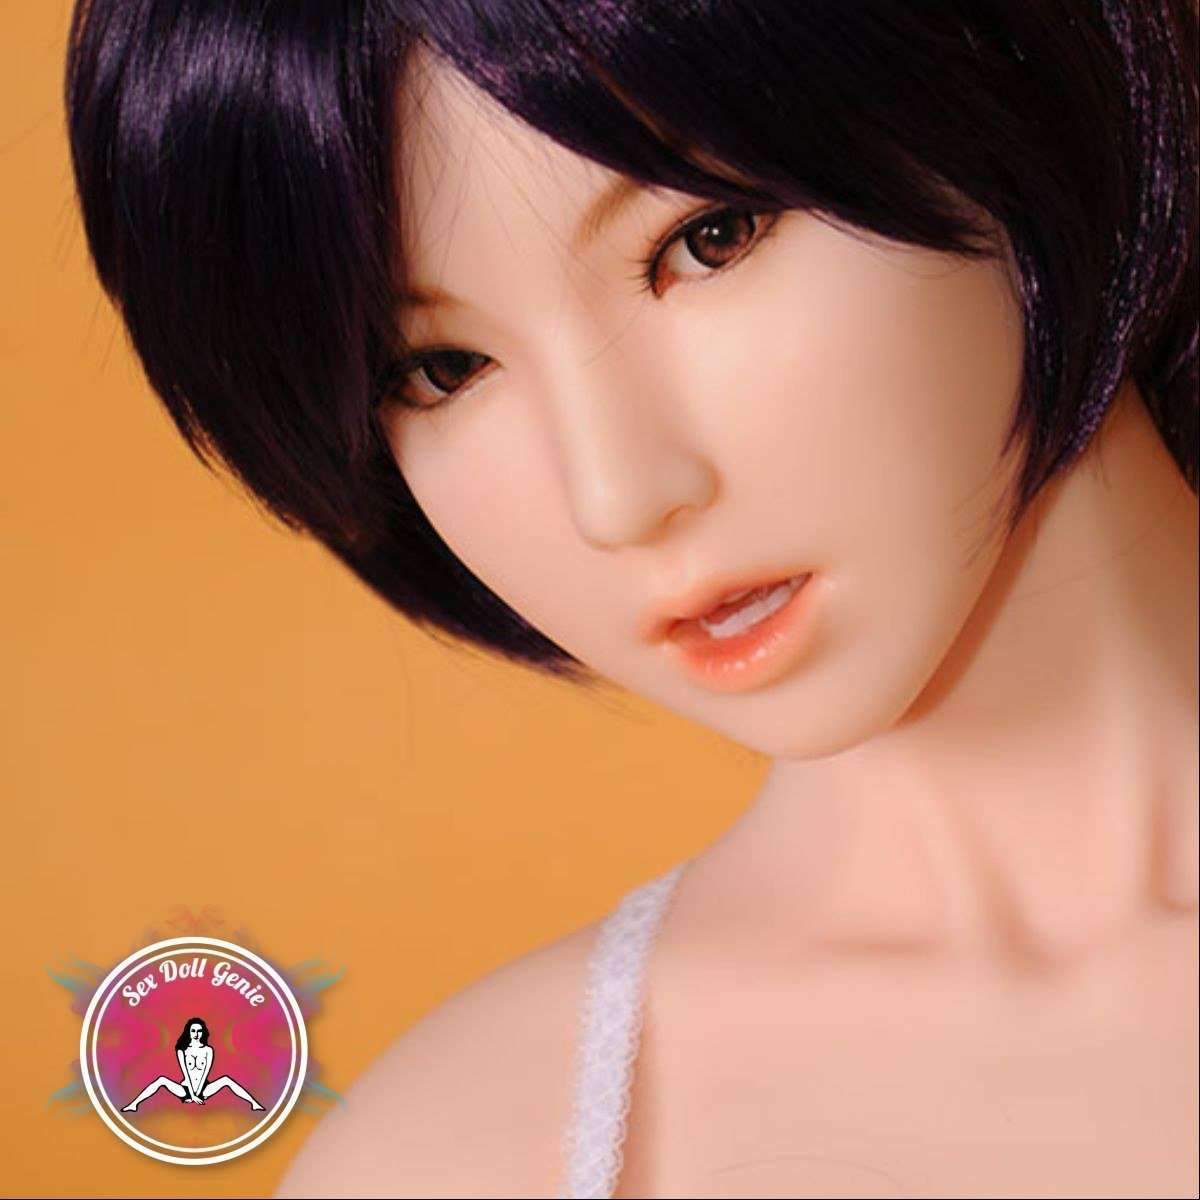 DS Doll - 158Plus - Thera Head - Type 1 D Cup Silicone Doll-18